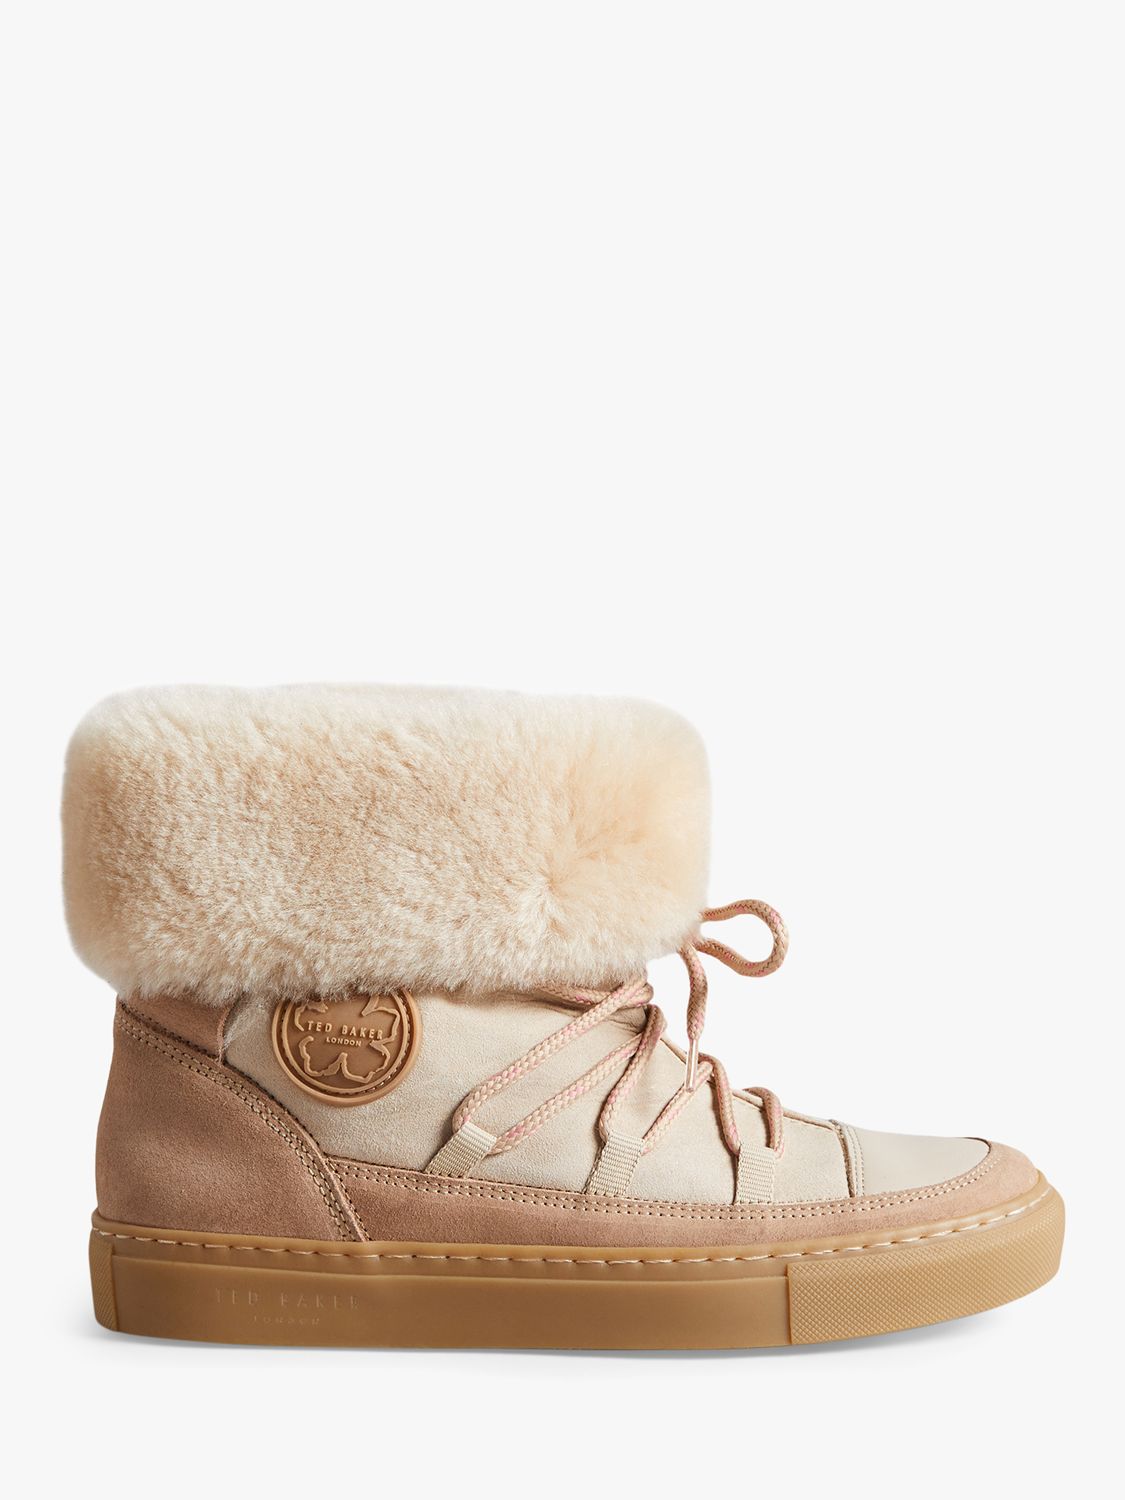 Ted Baker Izaya Suede Lace Up Ankle Boots, Natural